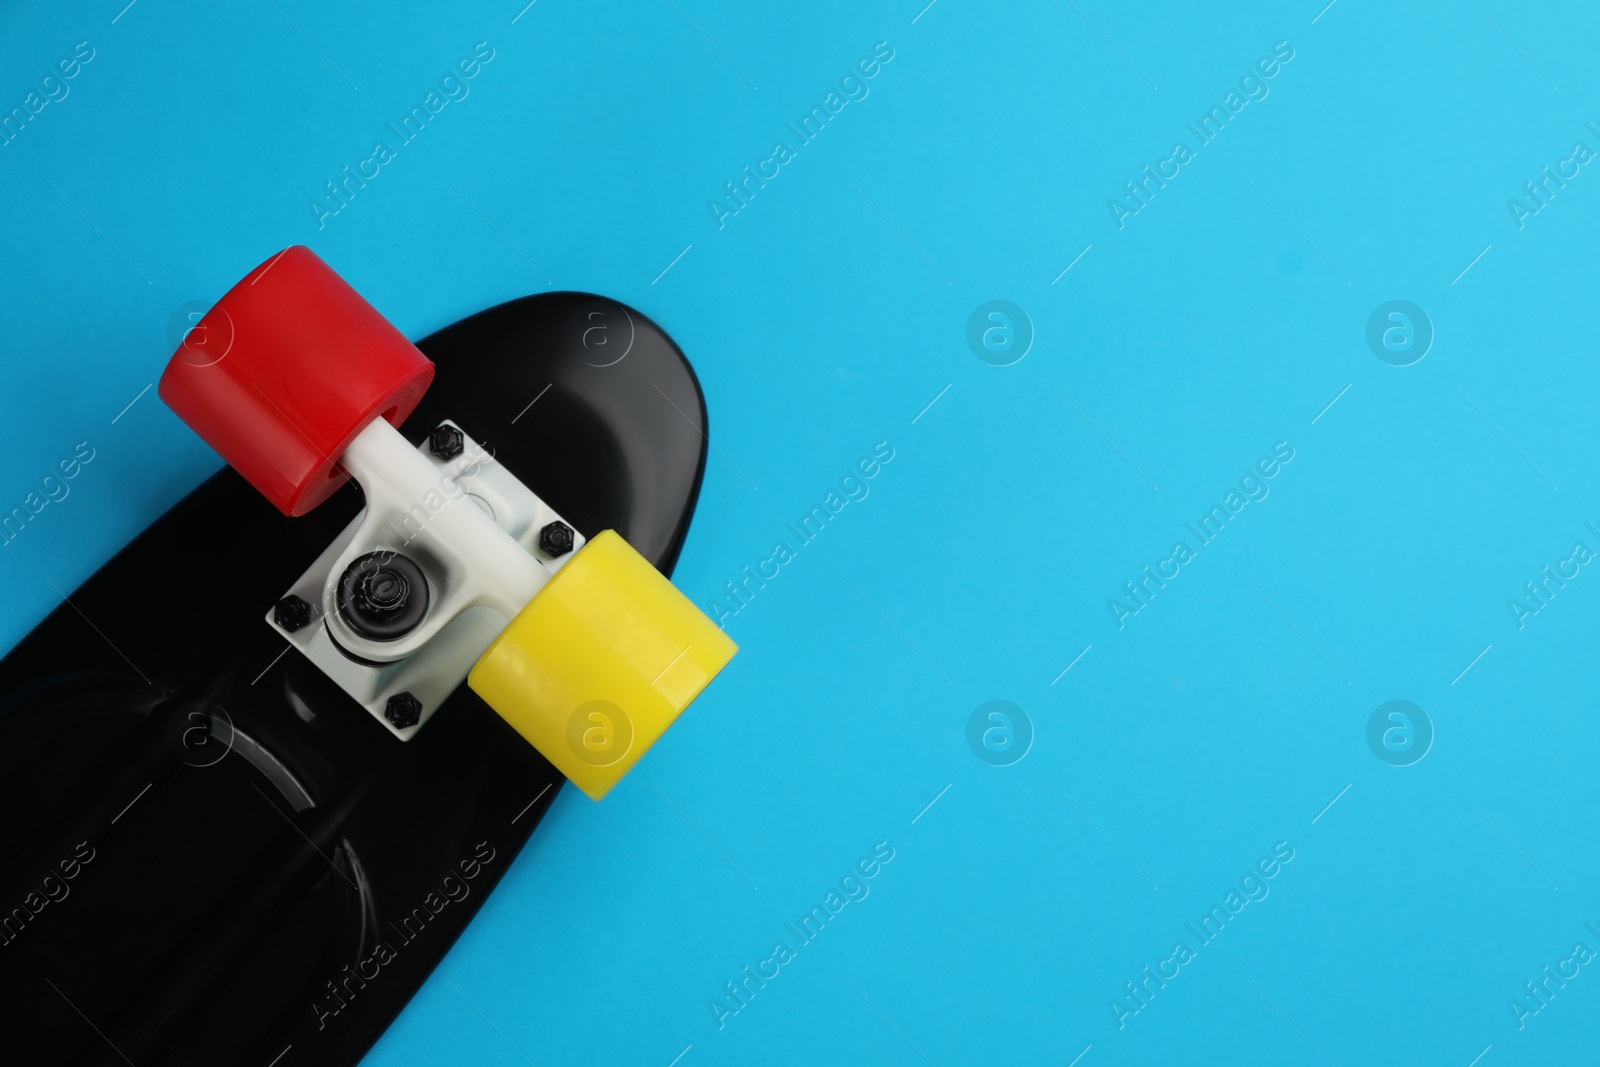 Photo of Skateboard on light blue background, top view. Space for text